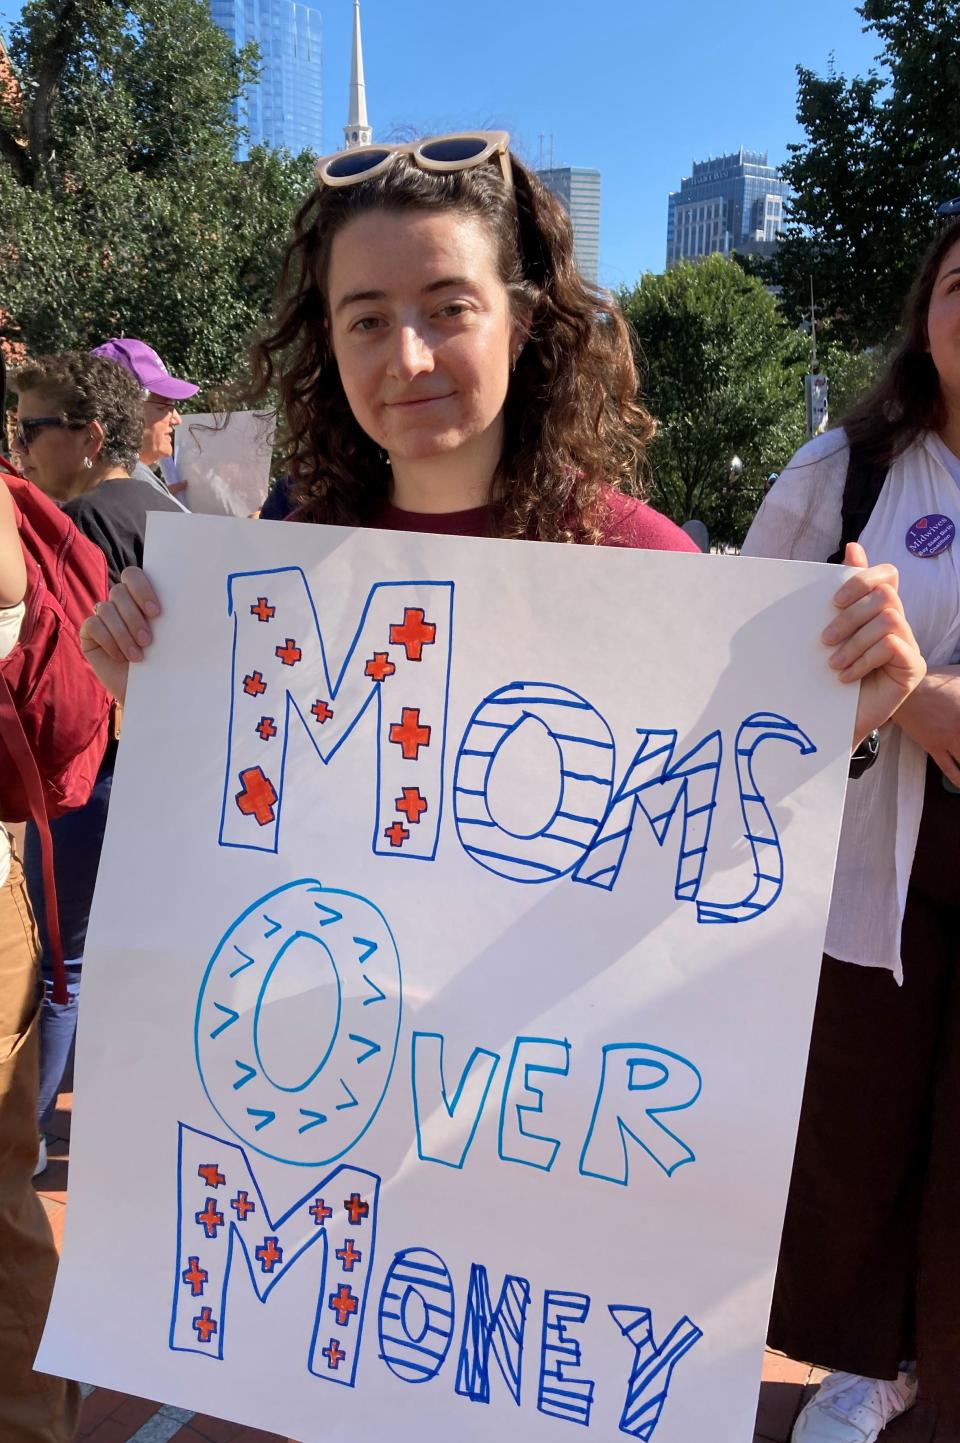 Shannon Malloy of Somerville attended the rally demanding Massachusetts address the discrepancies in maternal birthing outcomes as well as invest in midwives and doulas to enhance the birthing experience in the Bay State.